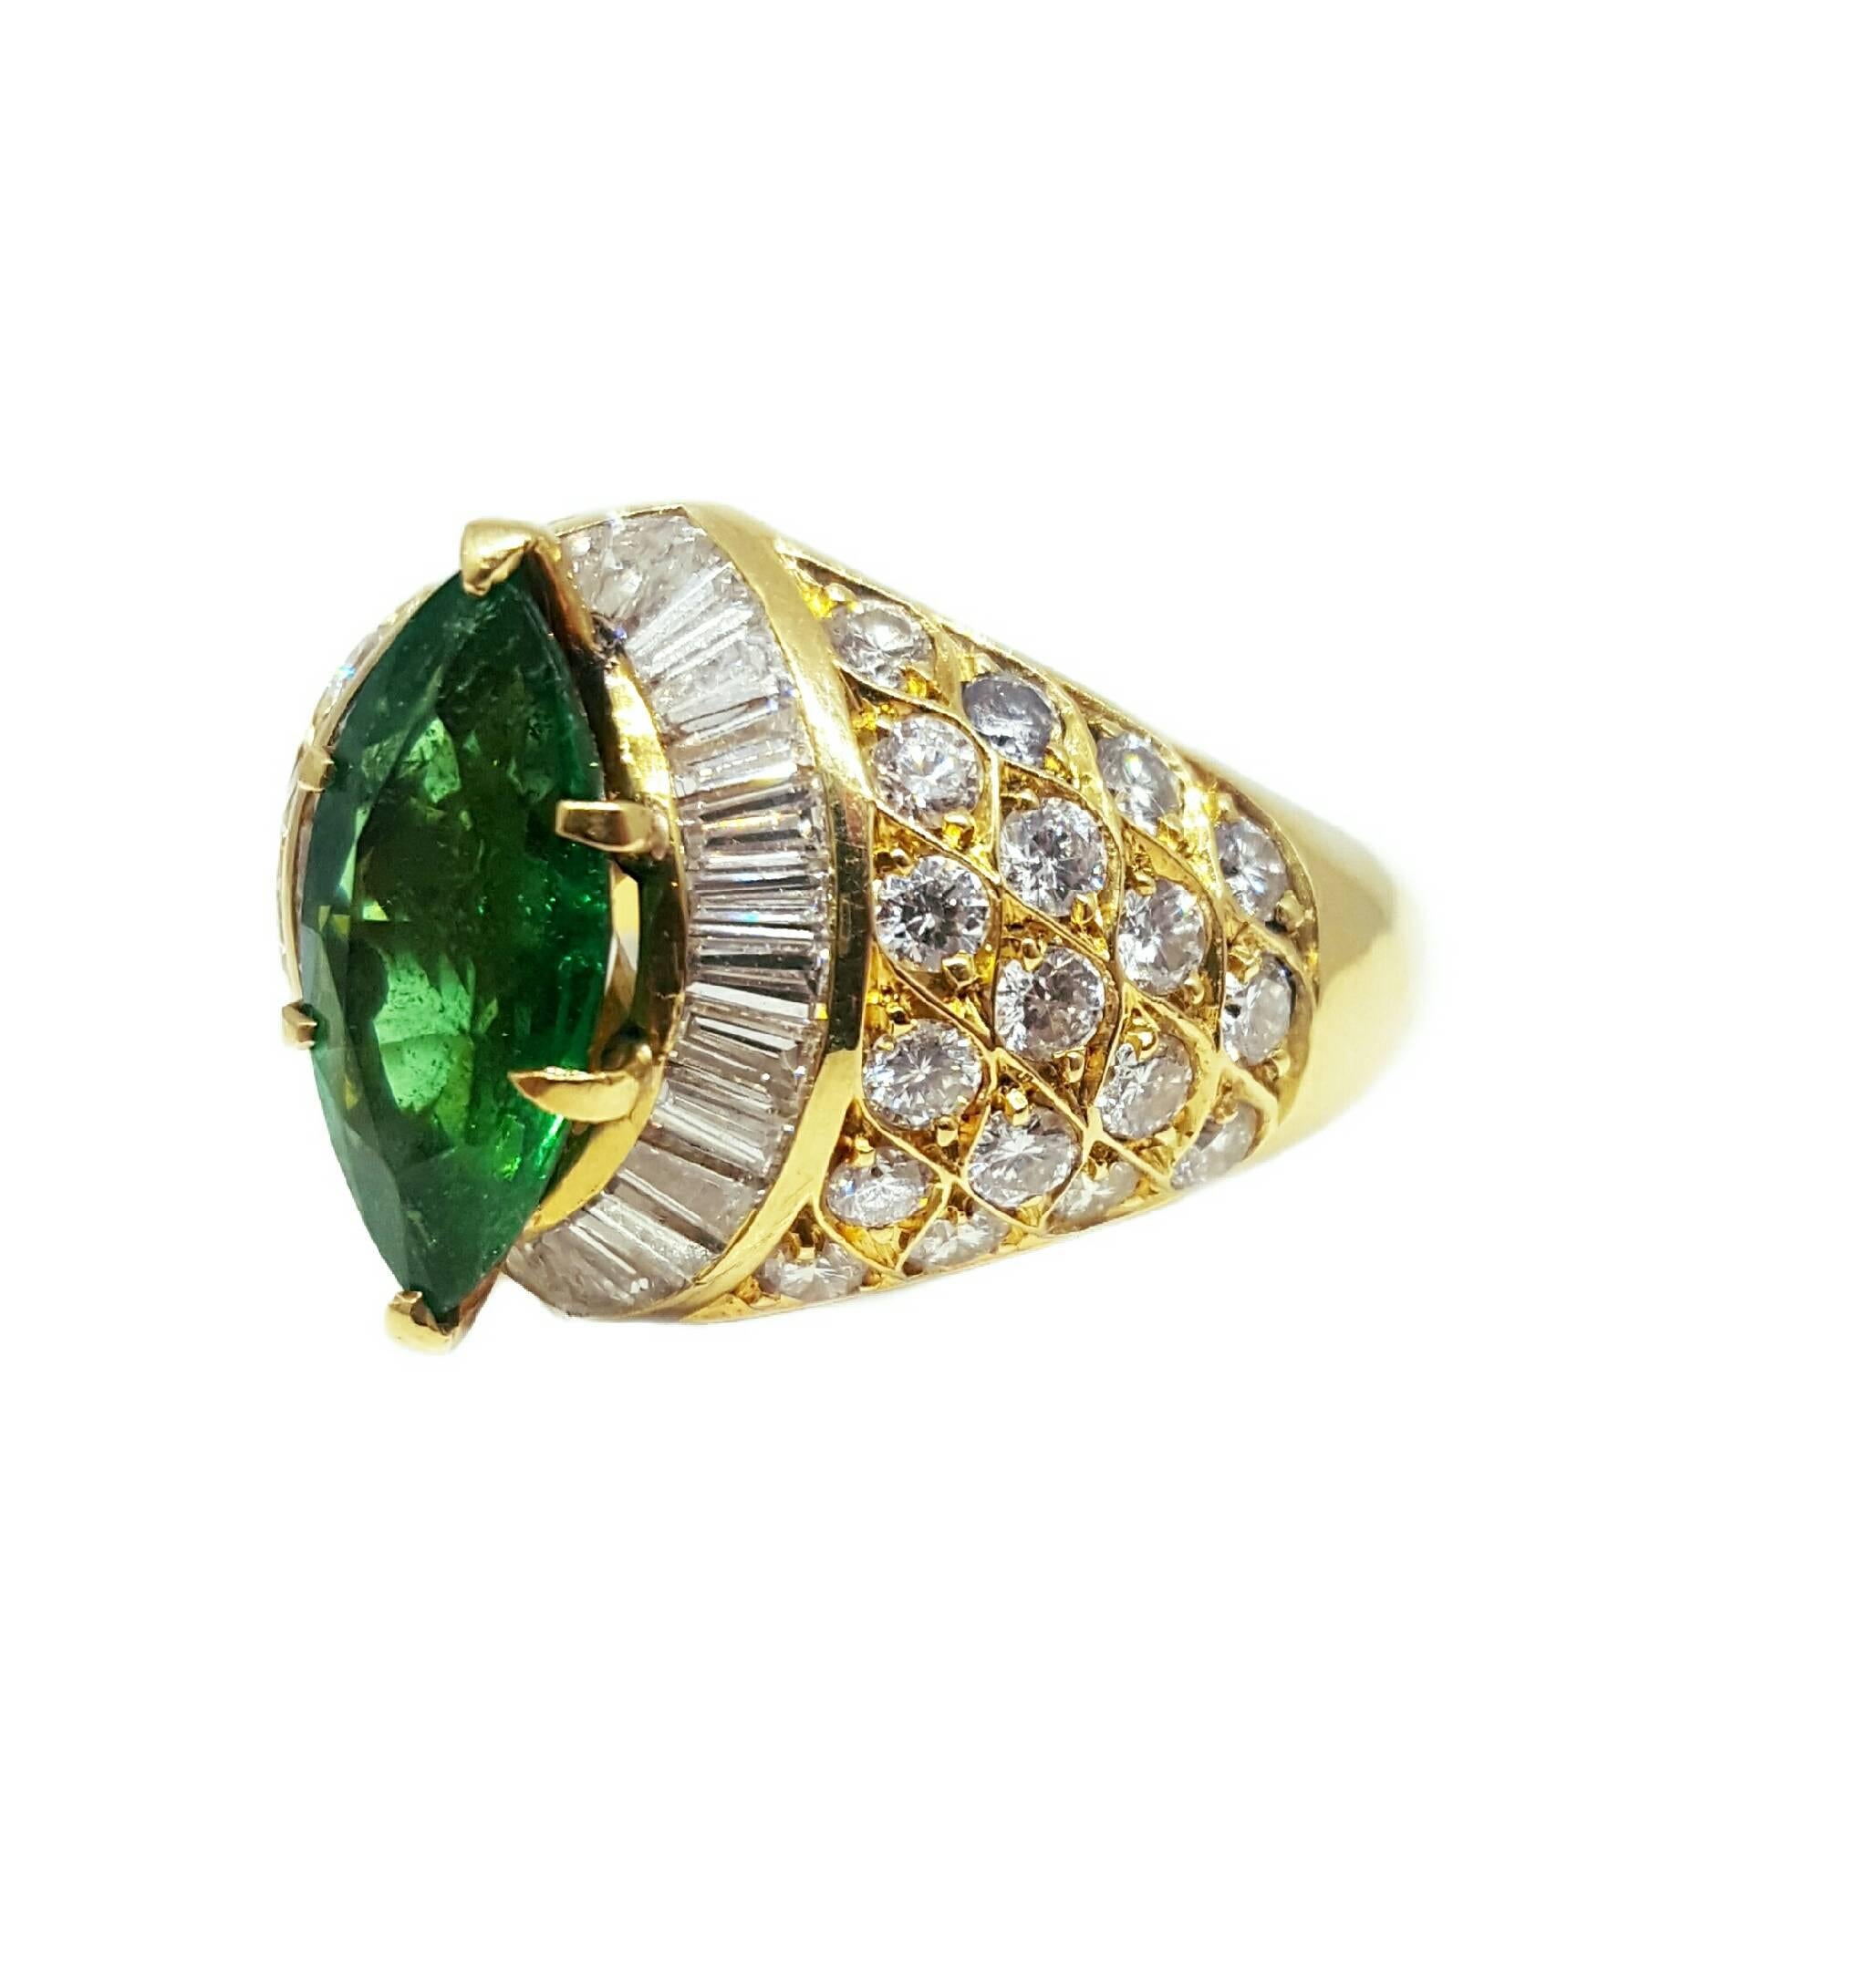 A one of a kind marquise cut emerald set into an 18 karat yellow gold mounting surrounded by 2.00 carats of diamonds. The emerald is a fine medium dark green color and weighs approximately 2.00 carats. Made by an unknown designer, the best part